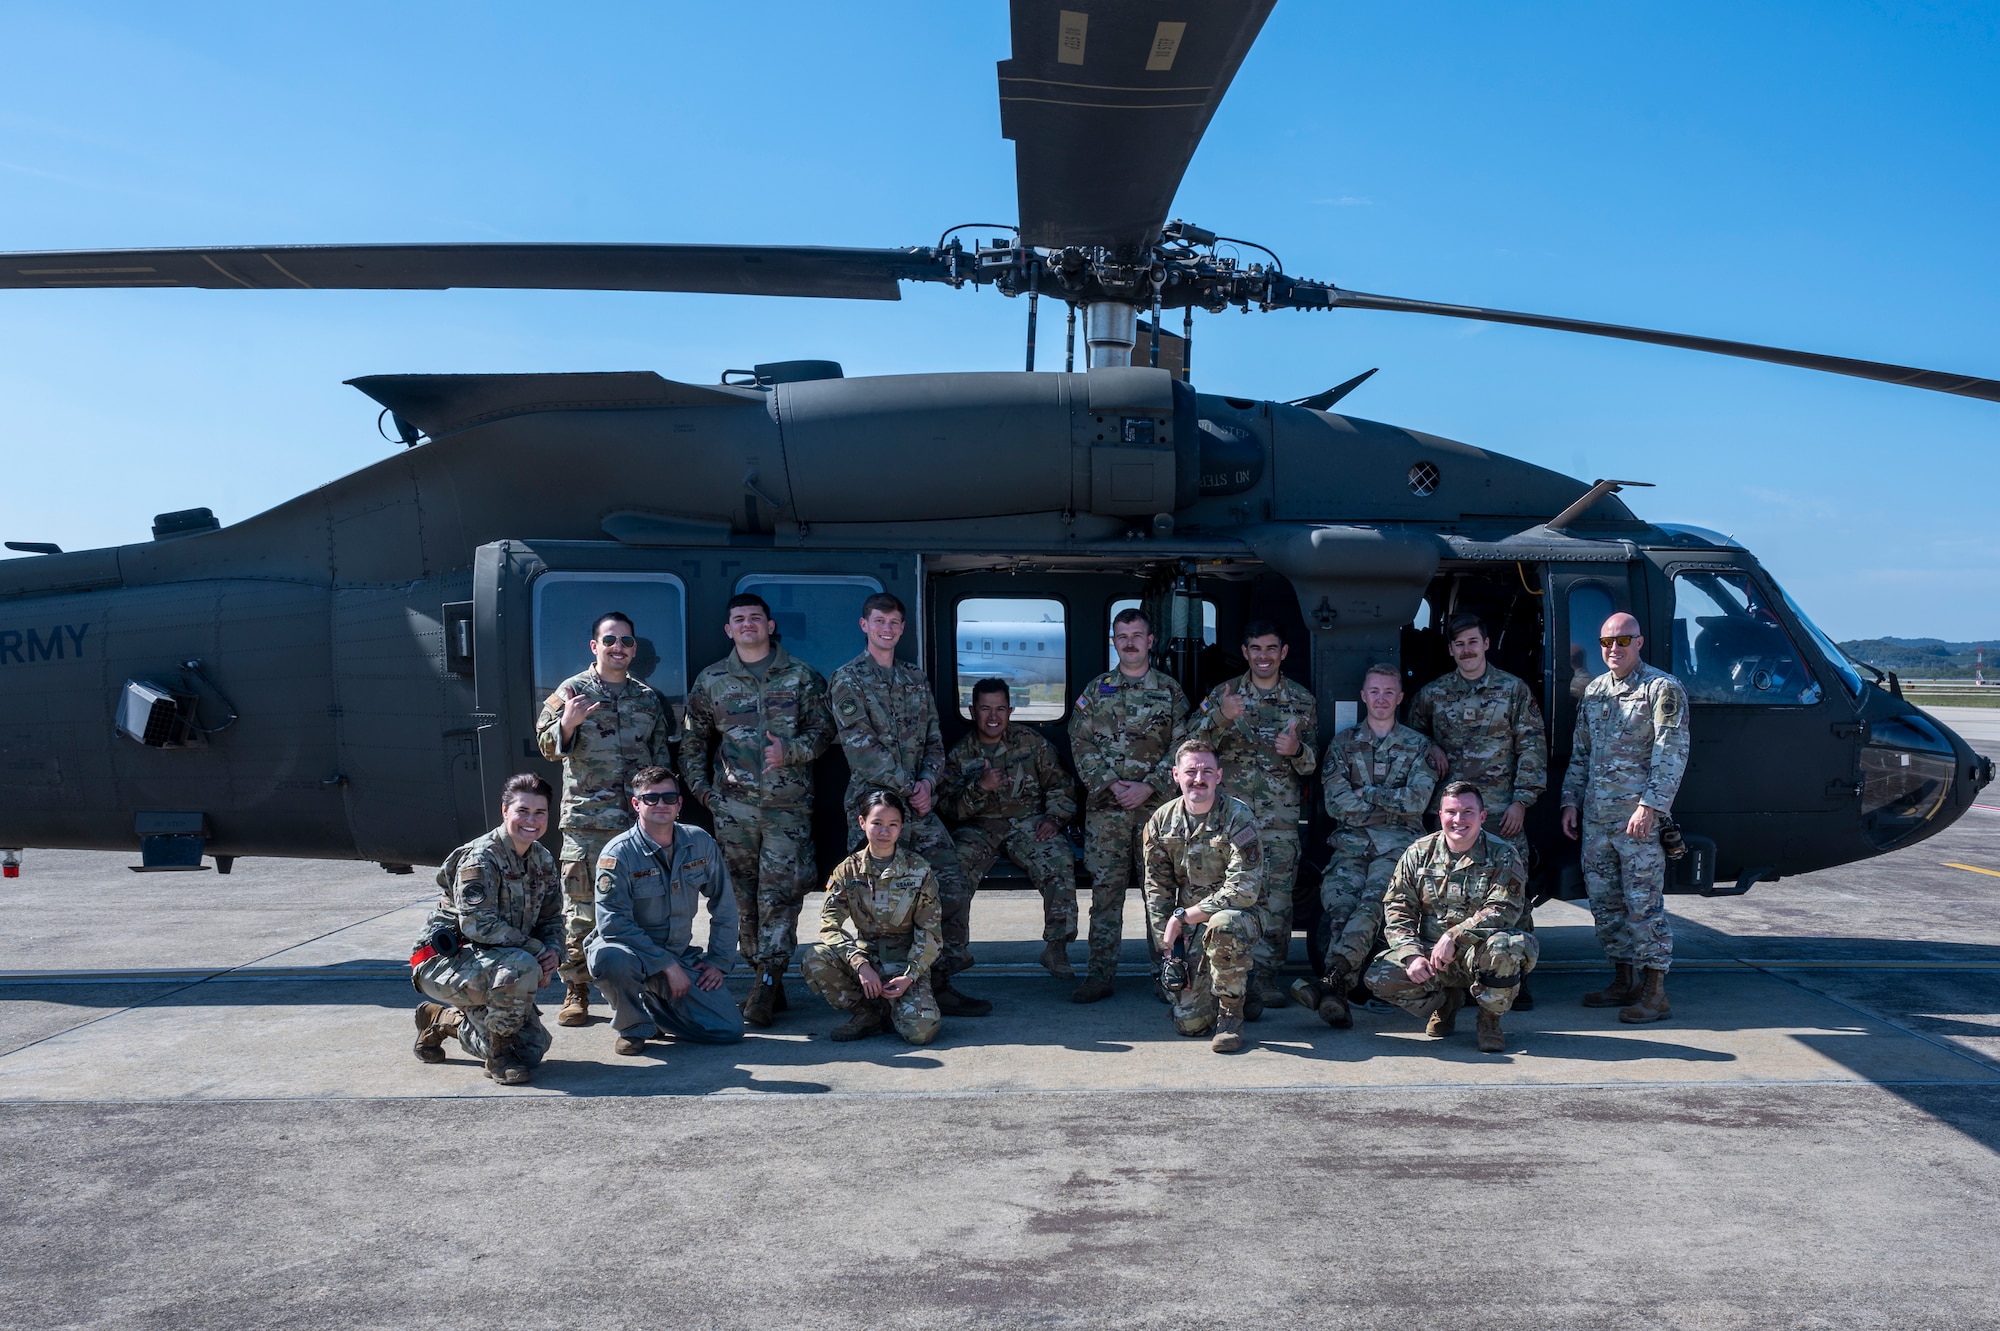 U.S. Air Force 51st Maintenance Group Airmen pose for a photo with U.S. Army 2-2 Assault Helicopter Battalion Soldiers in front of a Black Hawk helicopter after an integrated sling load training at Osan Air Base, Republic of Korea, Oct. 13, 2022.